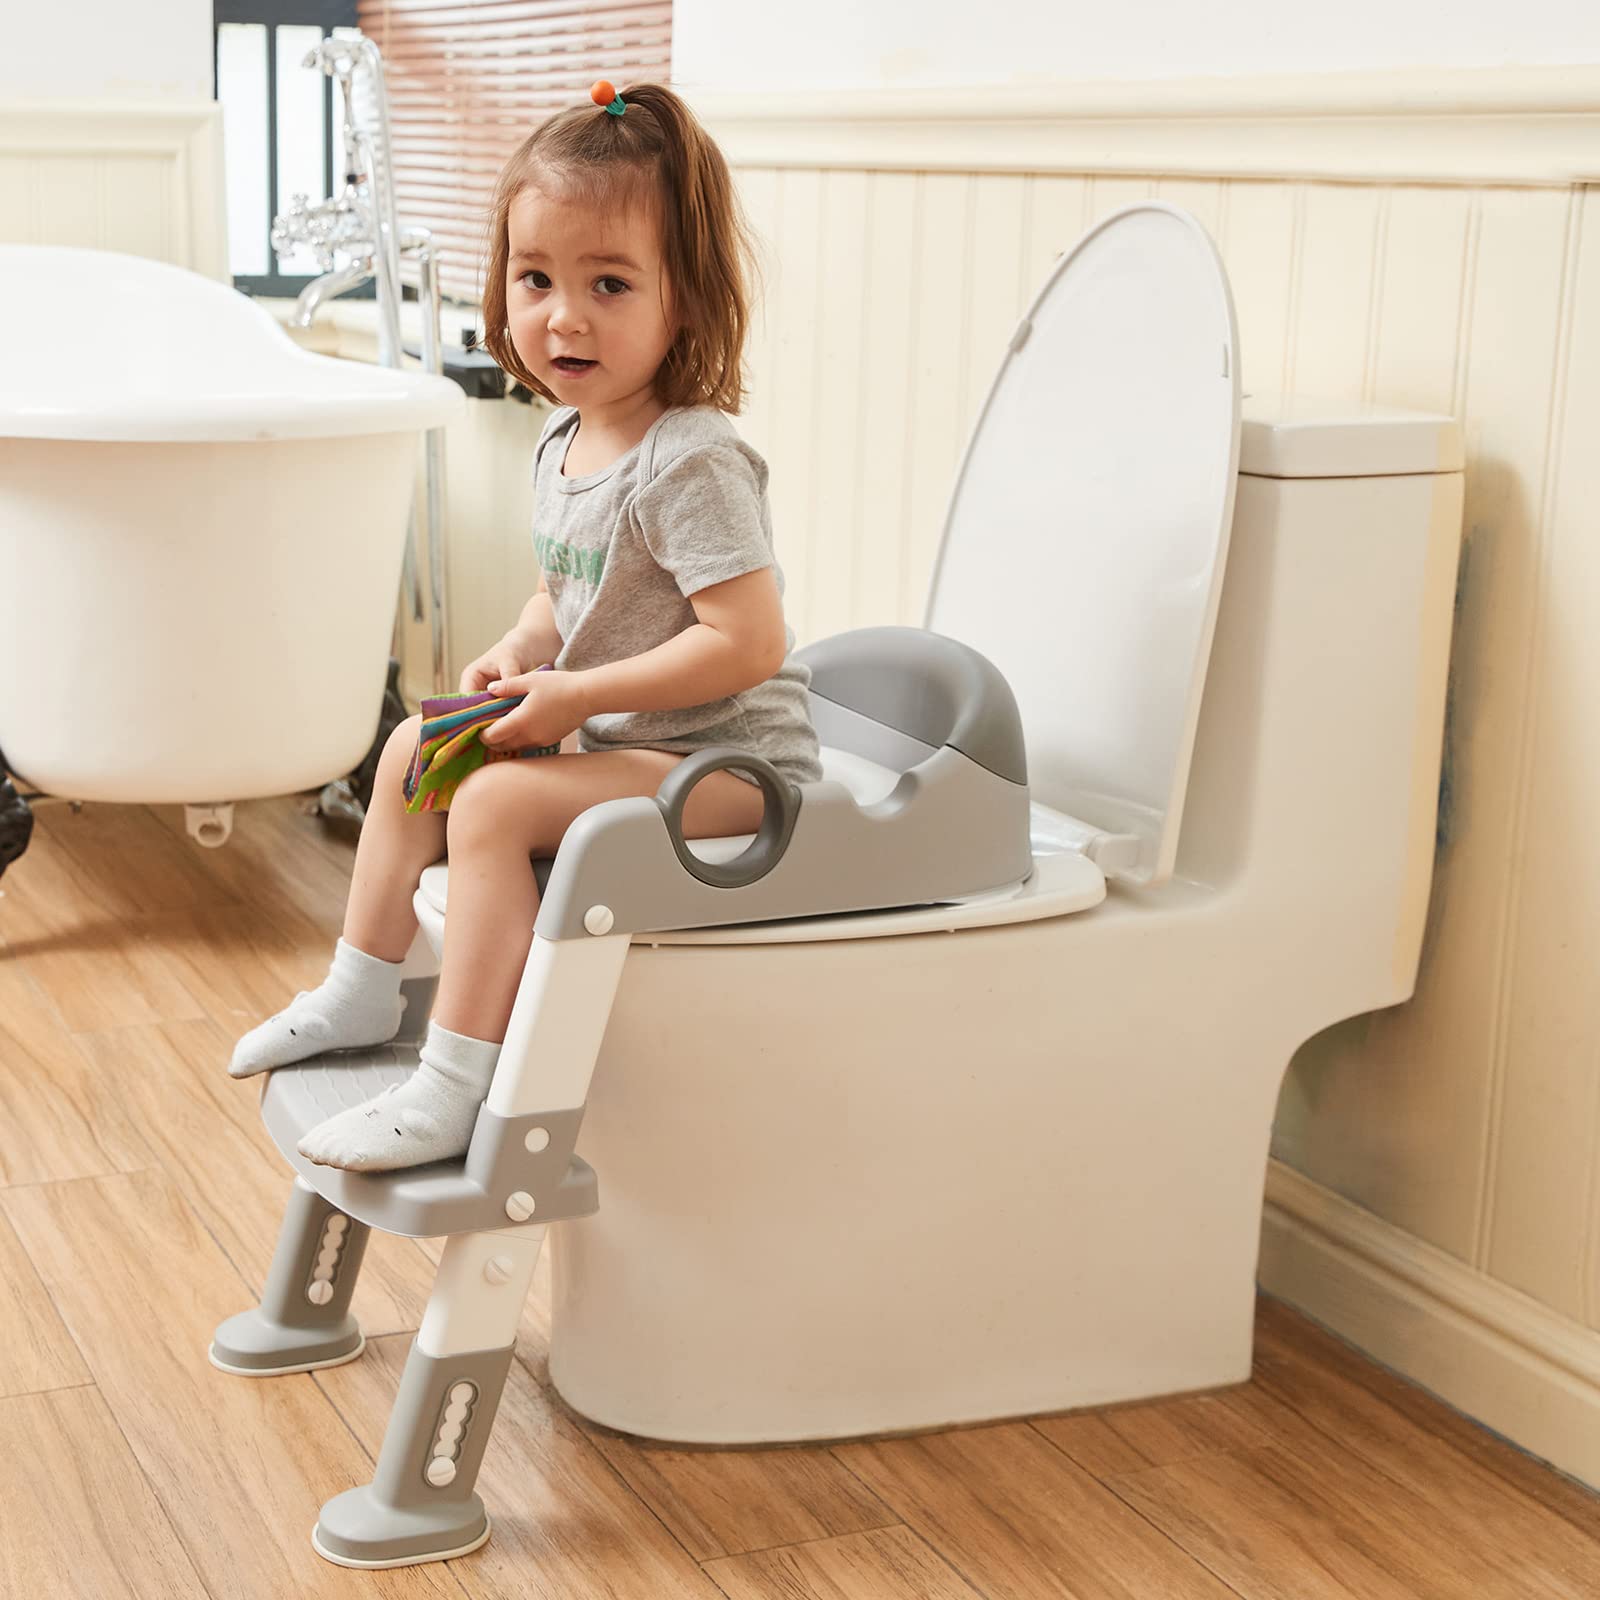 baby toilet seat for 3 year old Potty train author